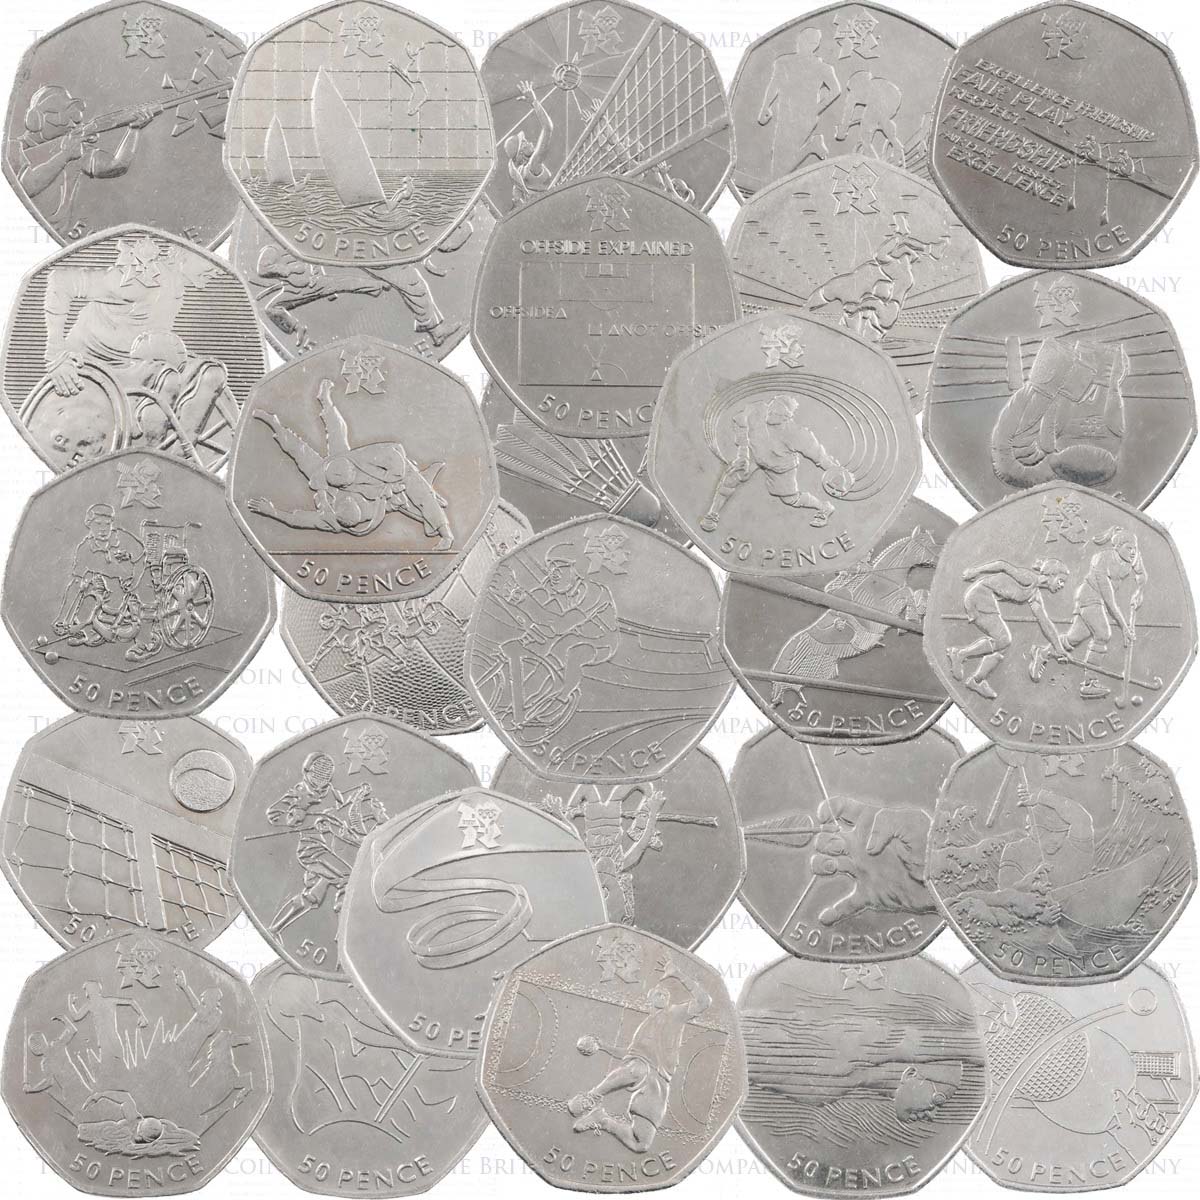 2011 Olympic 50p Coins